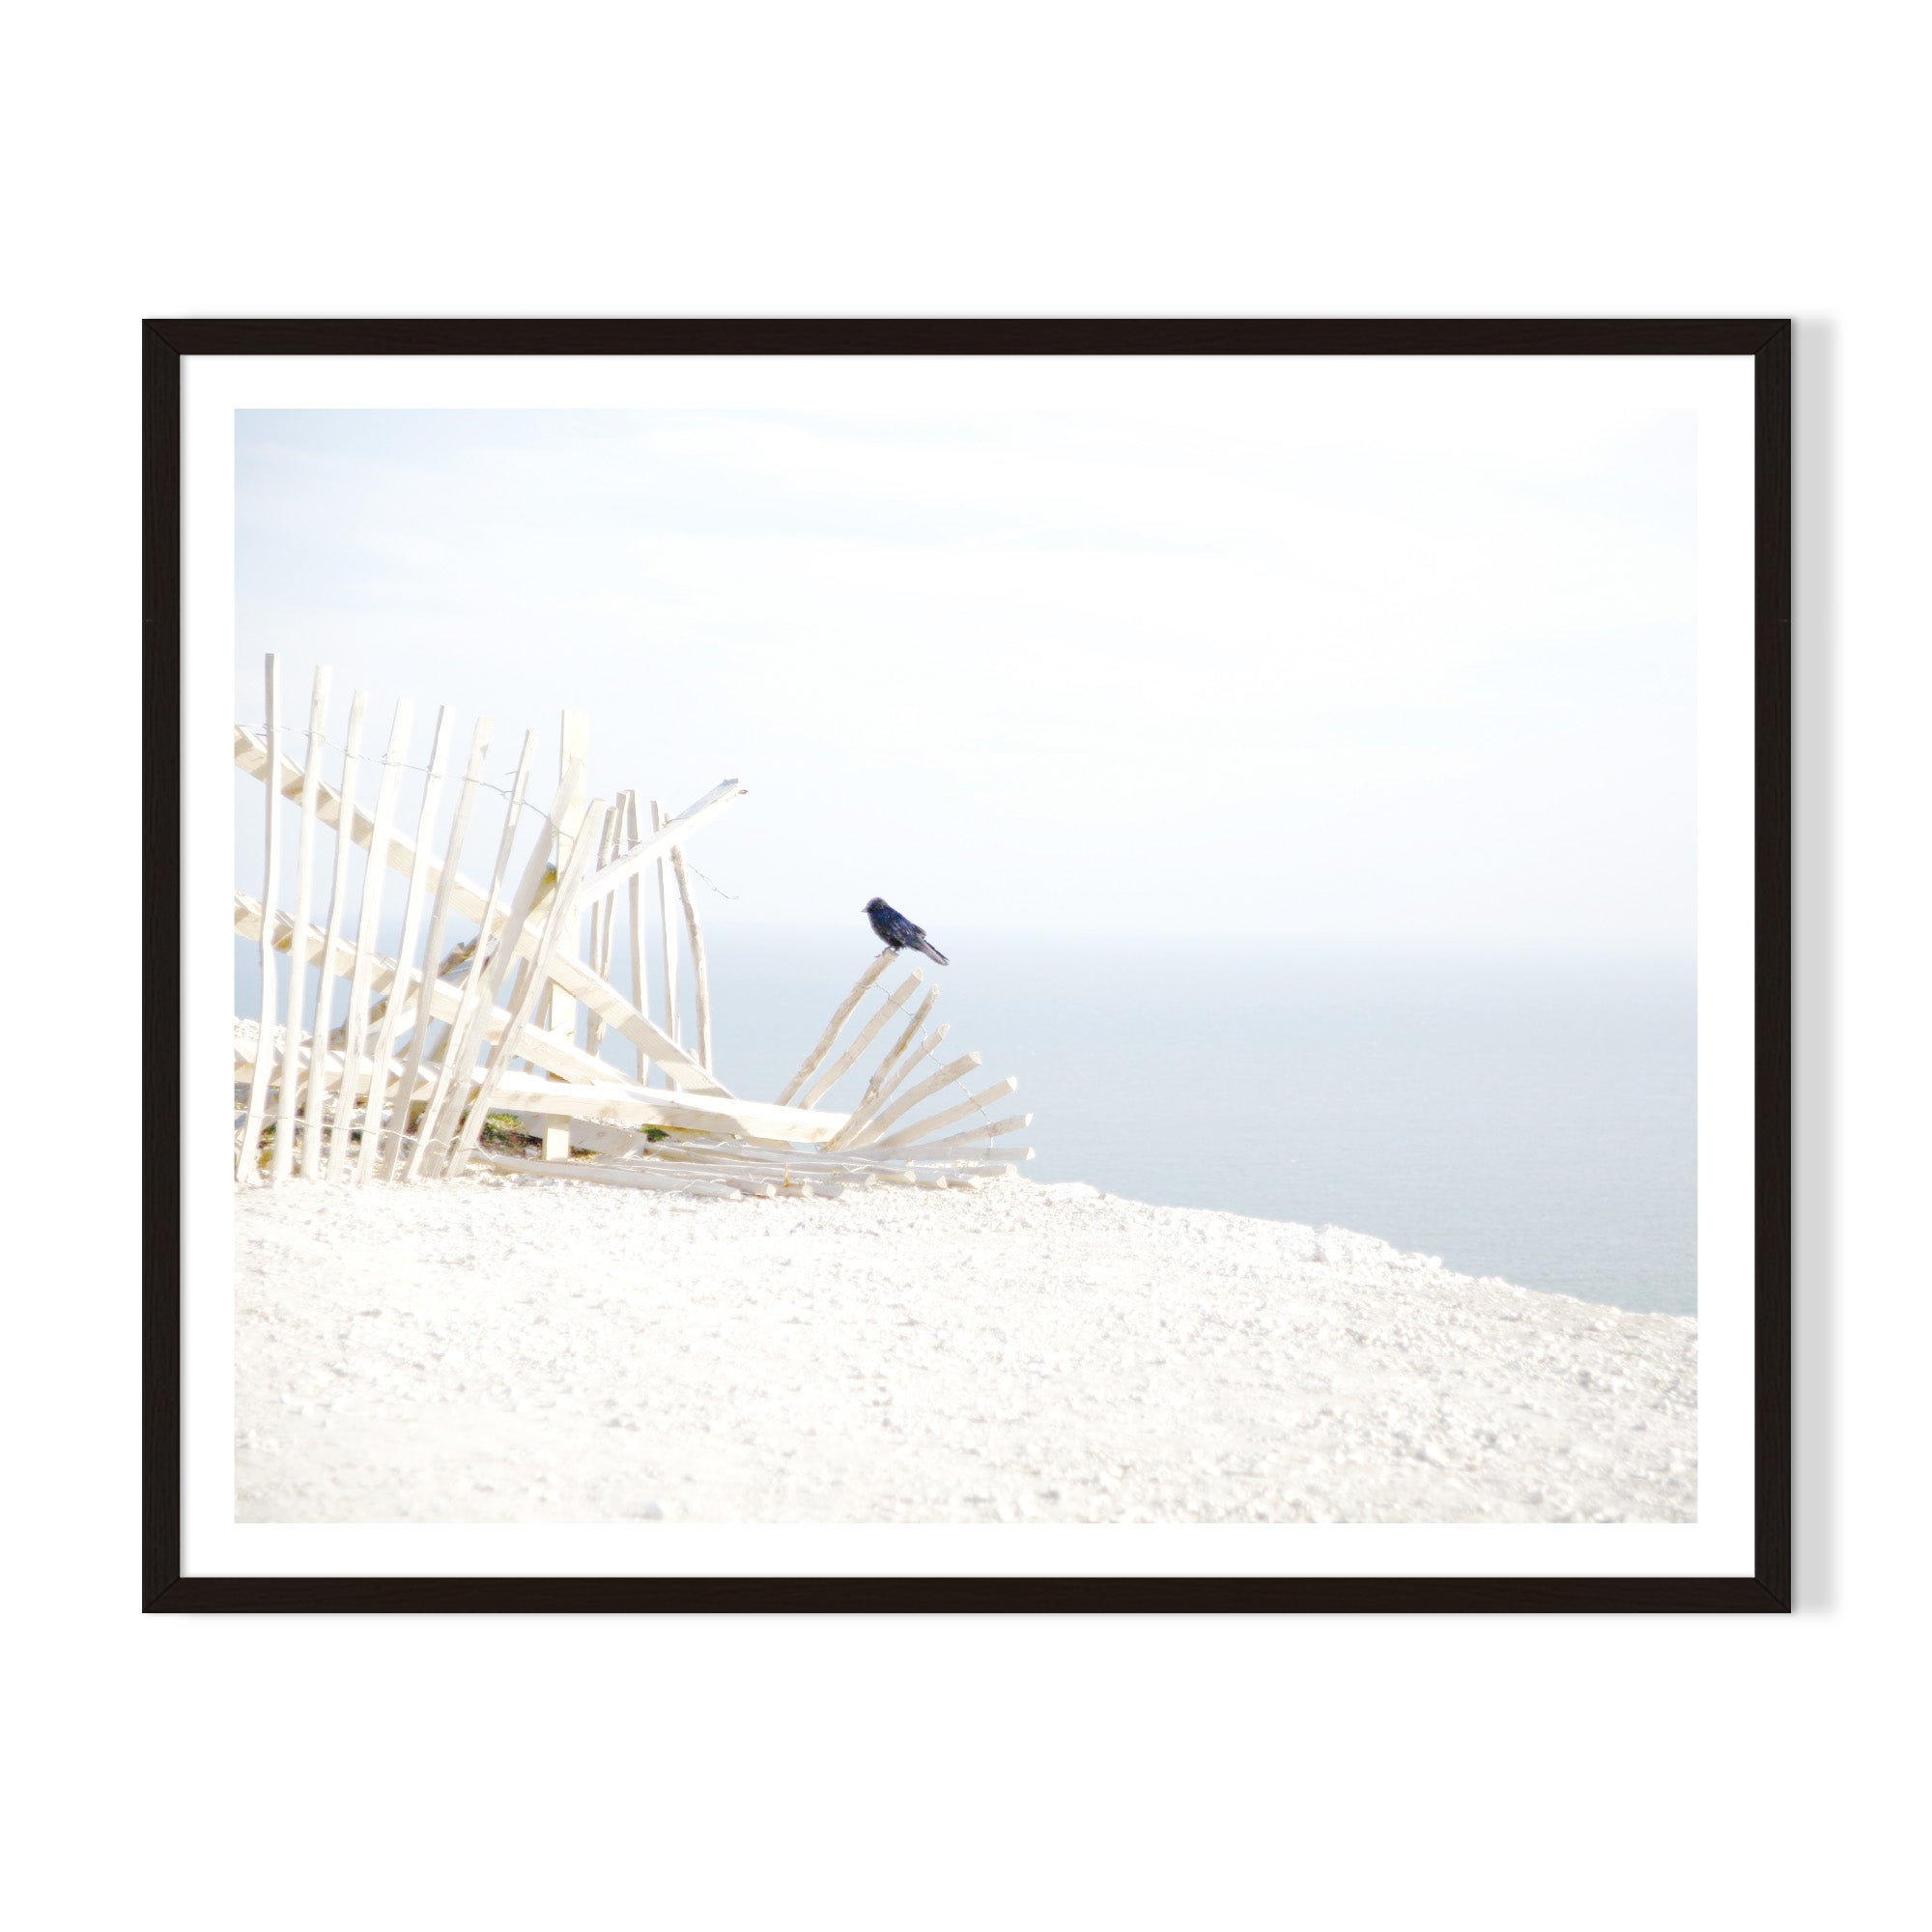 Perched Framed Printed Wall Art - Black